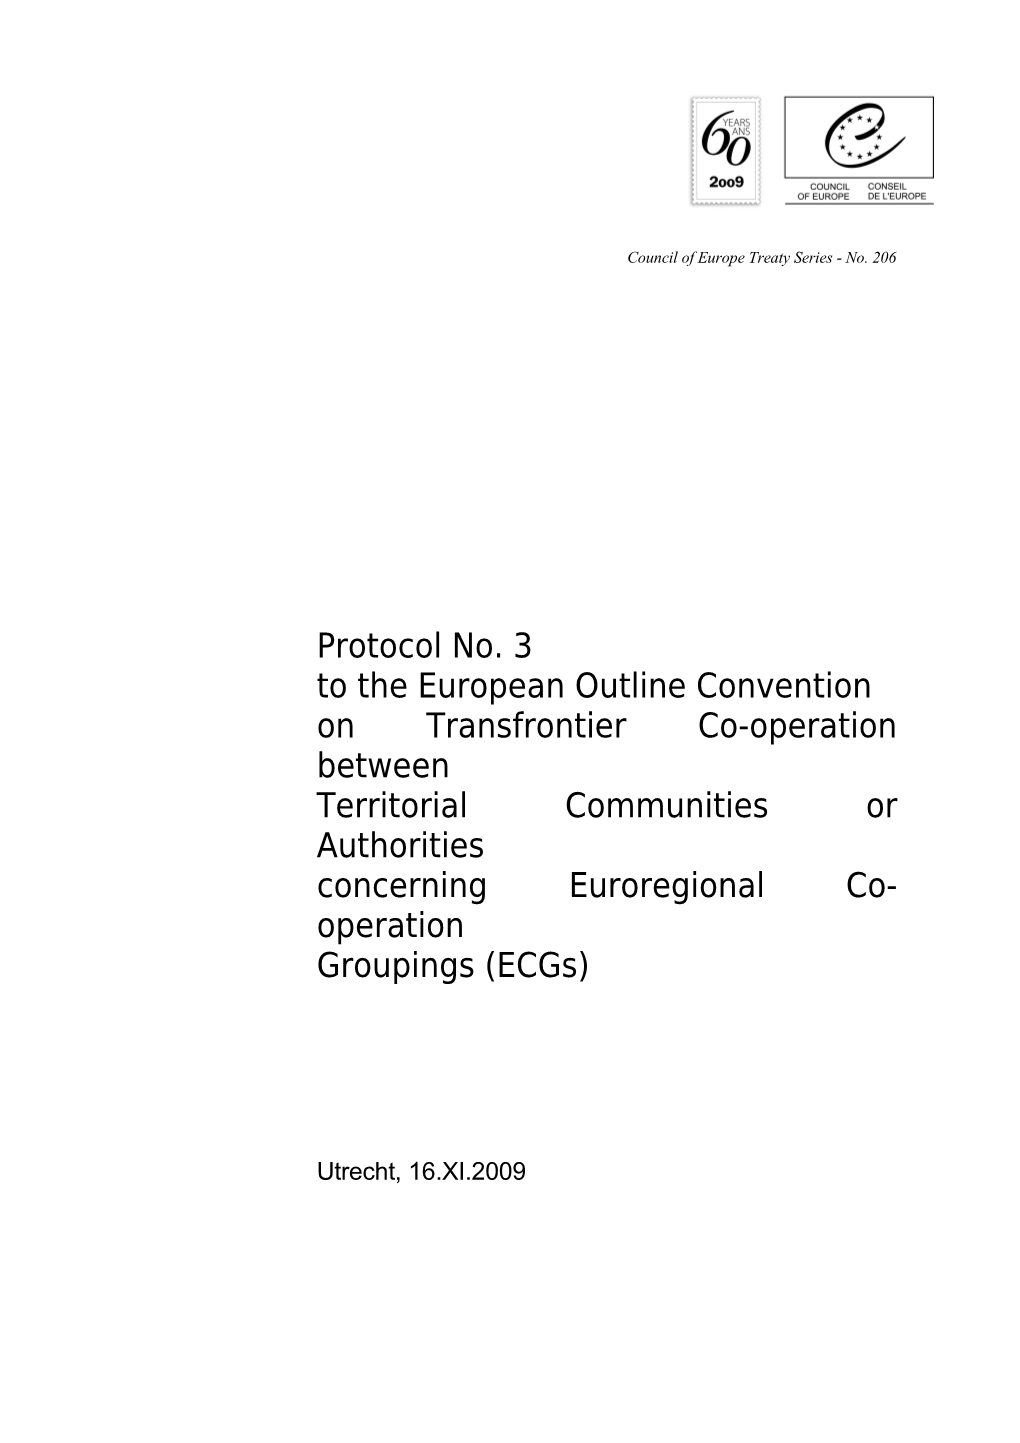 Protocol No. 3 to the European Outline Convention on Transfrontier Co-Operation Between